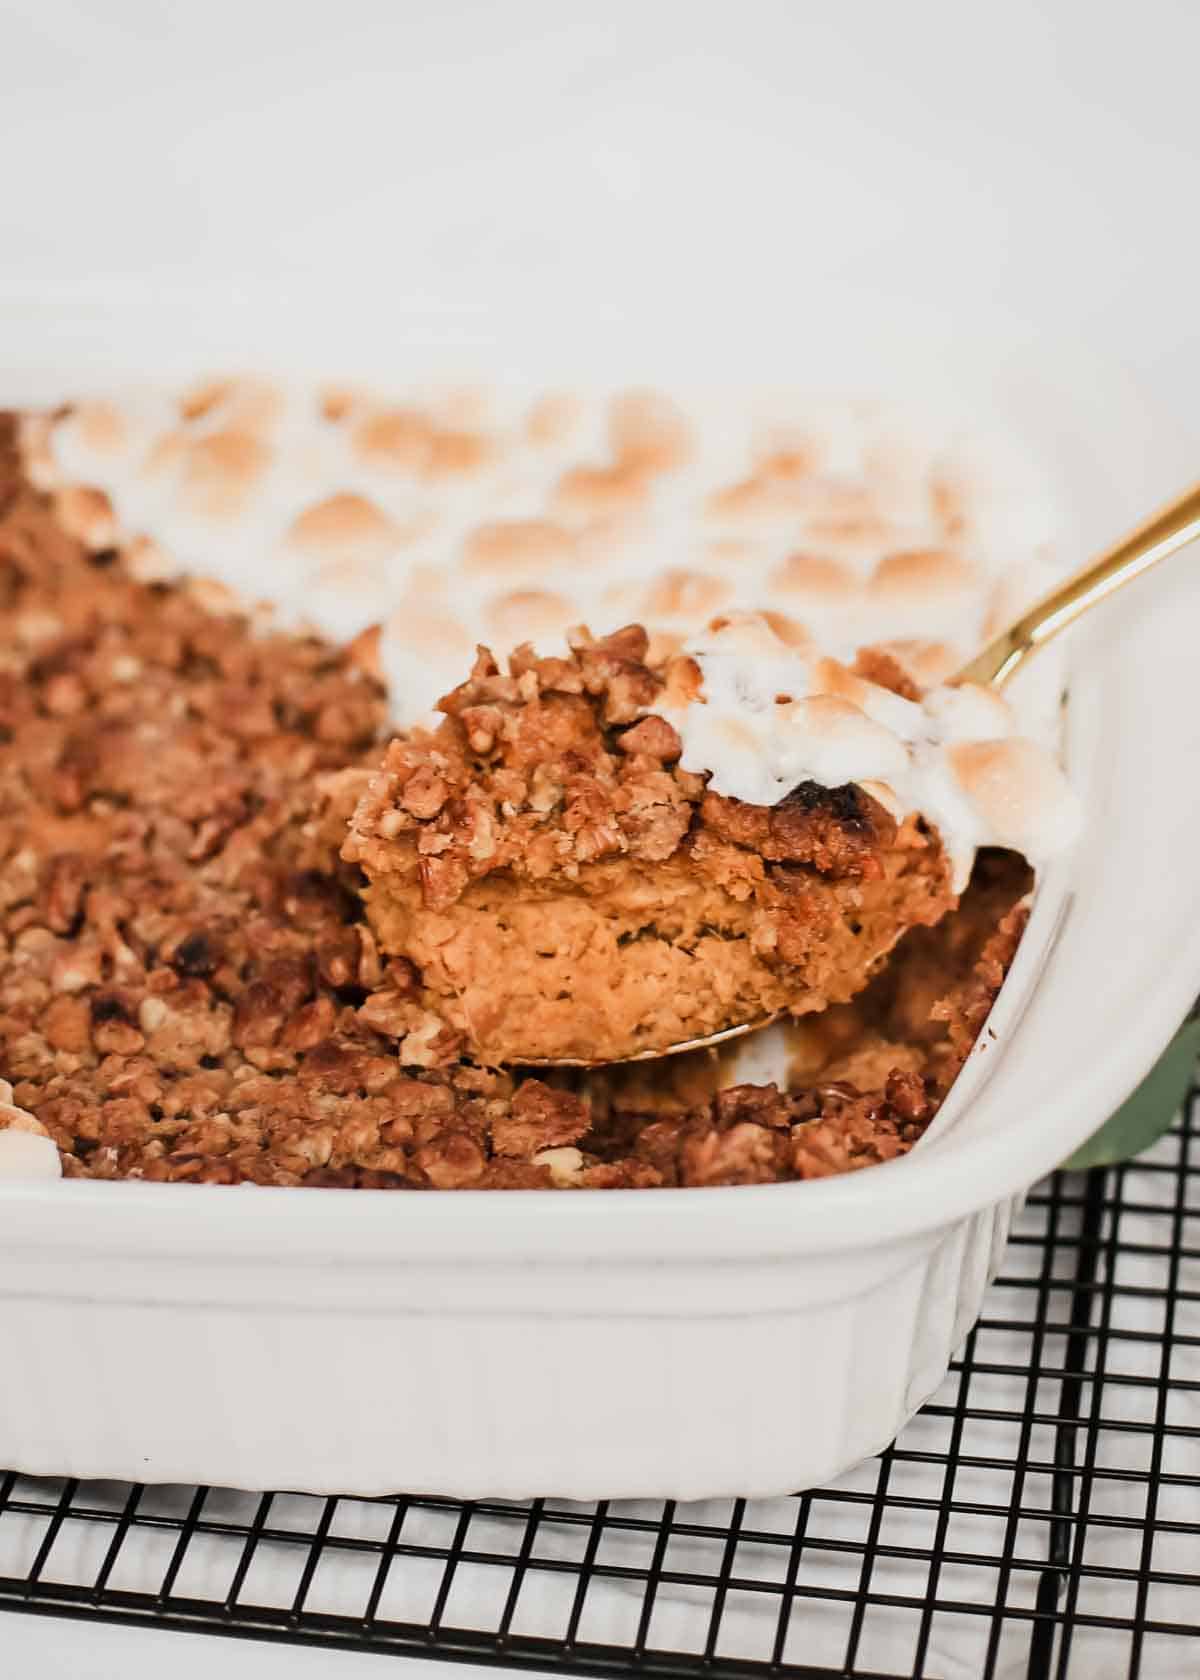 large spoon lifting out a scoop of sweet potato casserole.